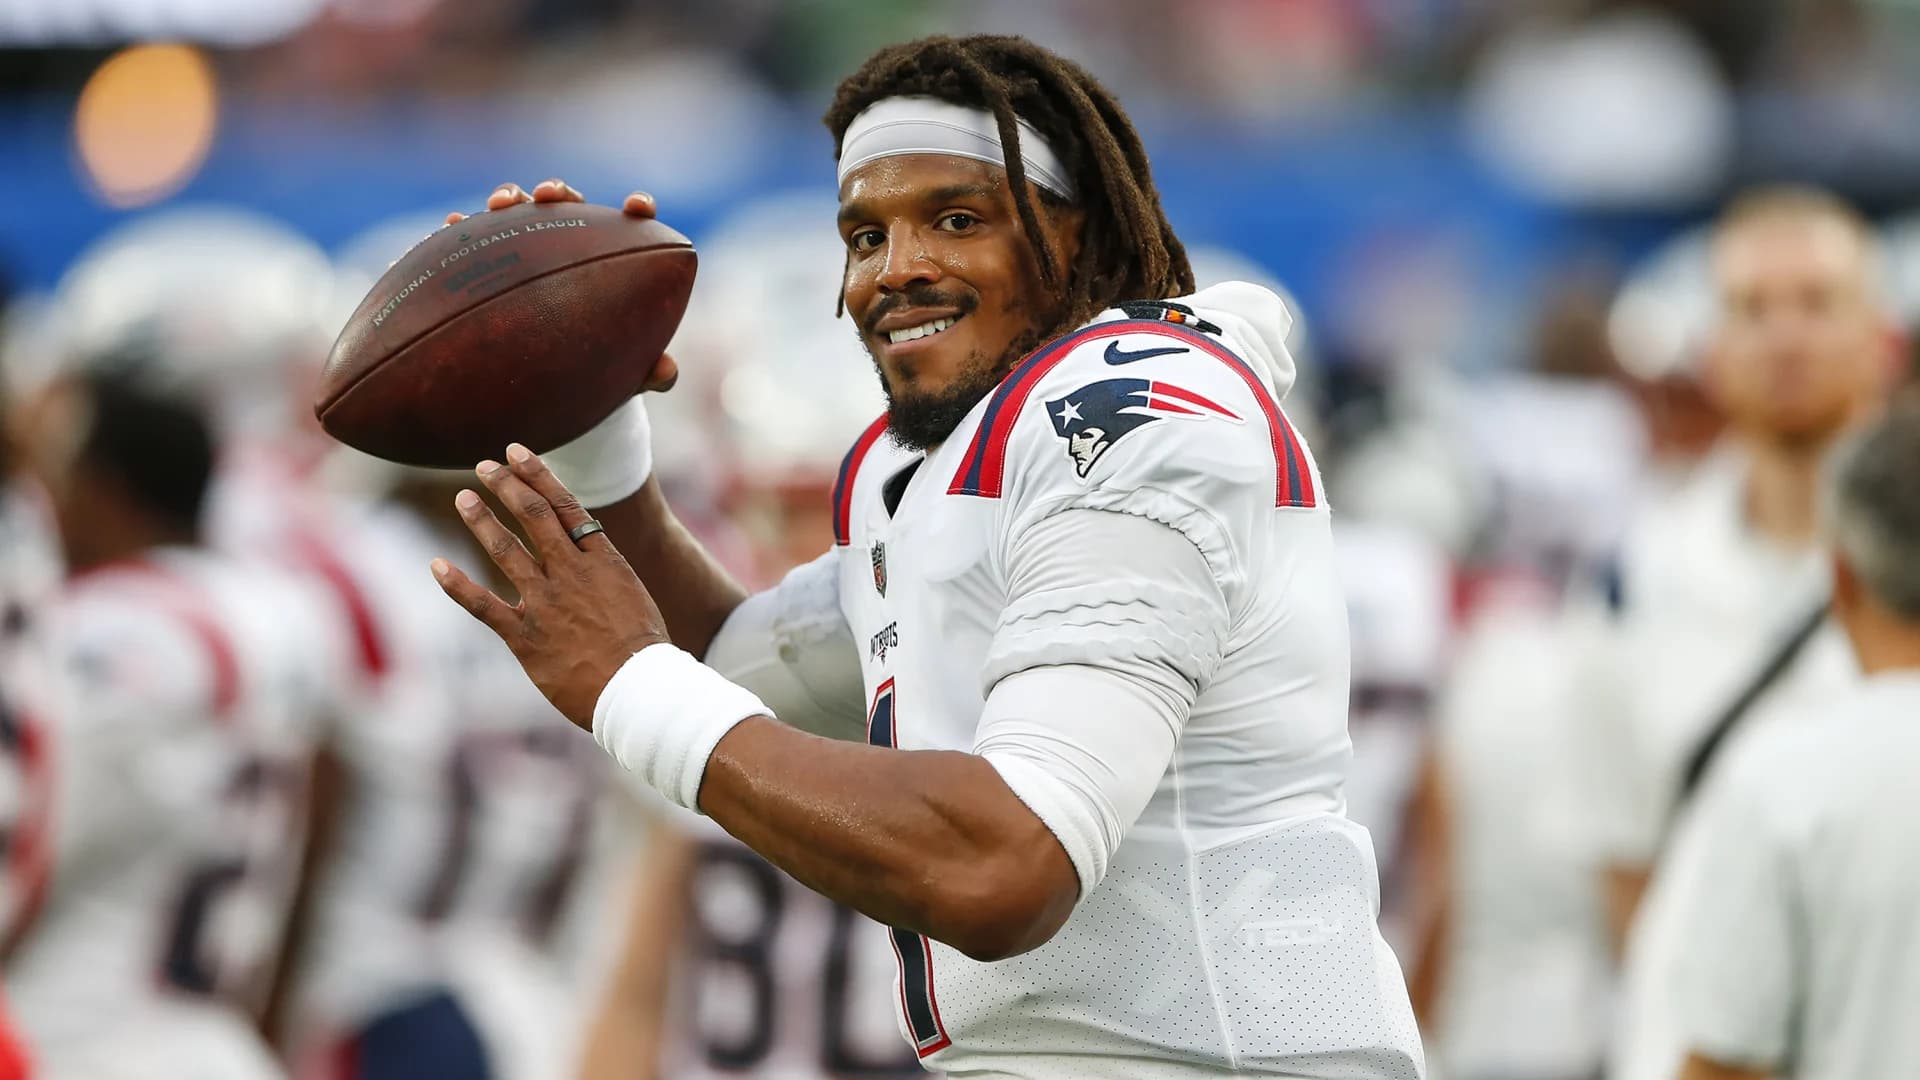 AP source: Pats cut Newton, clearing way for Jones to start